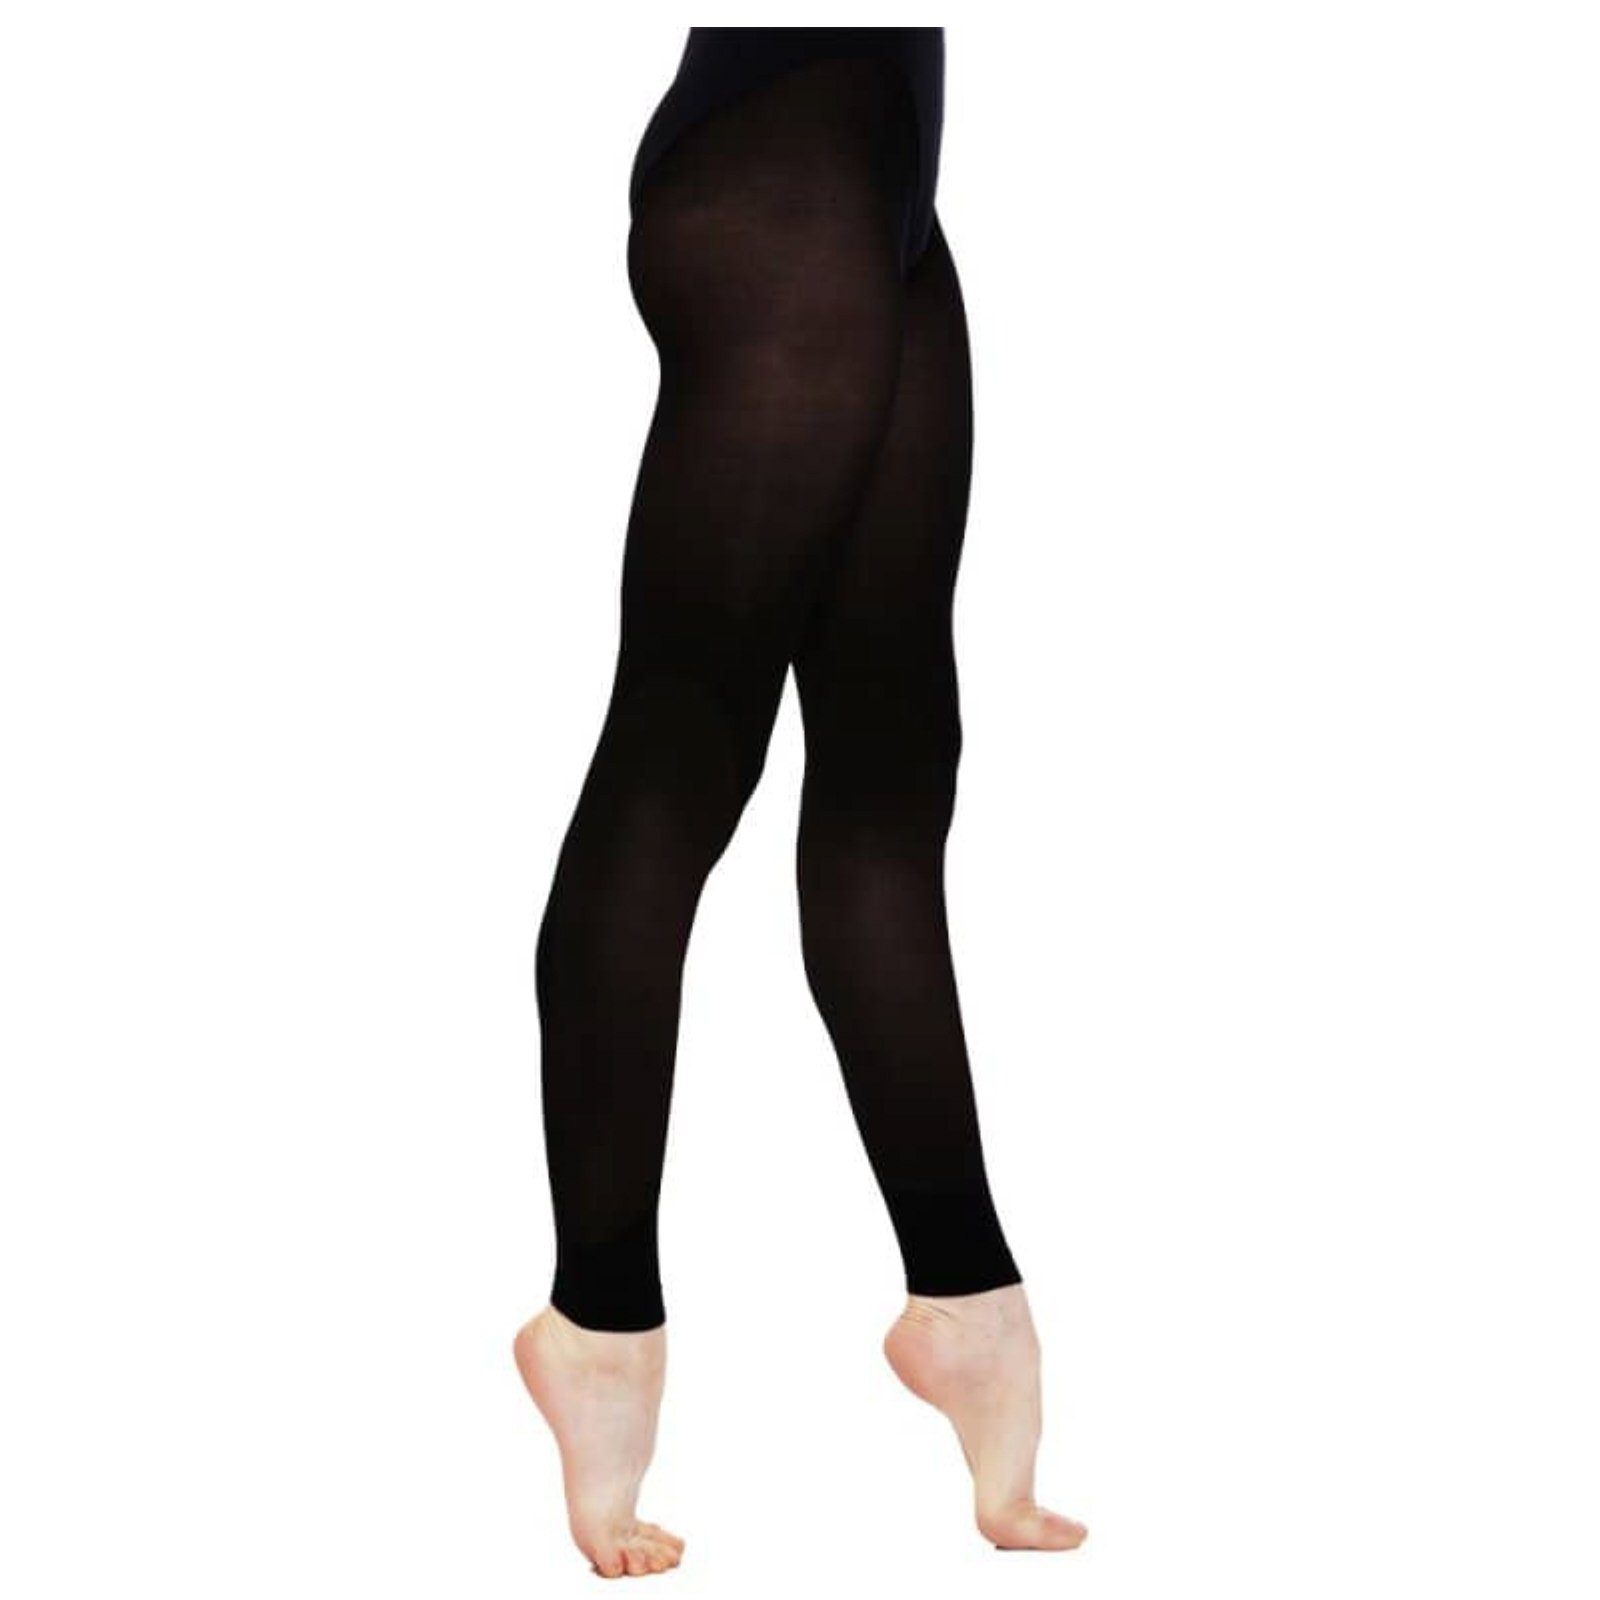 Classic Black Leggings, Dancewear Footless Hosiery, Silky Shiny, Yoga Tights,  Ballet Practicing, Sheer to the Waist, Made in Italy -  Canada